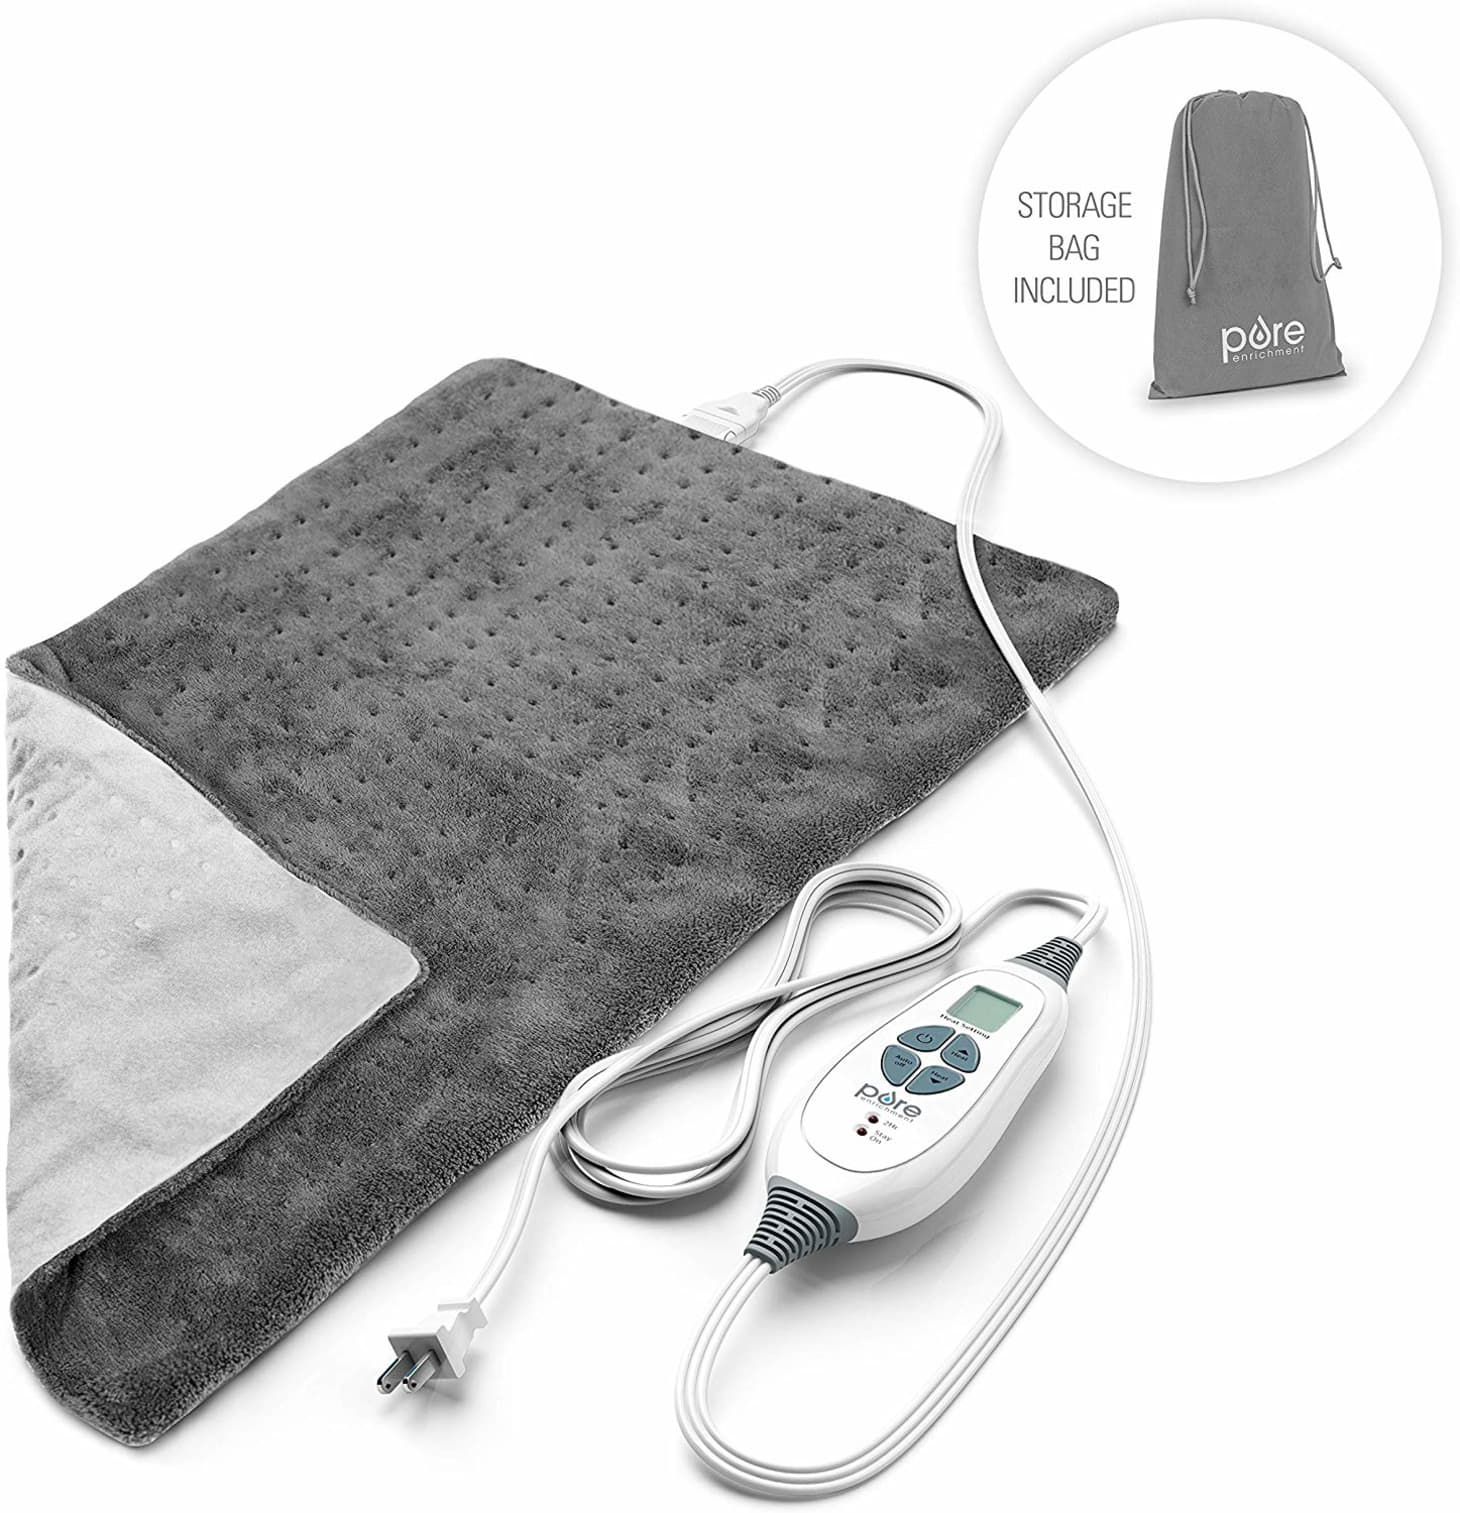 Gen Workflow Product Listing Pure Relief Heating Pad